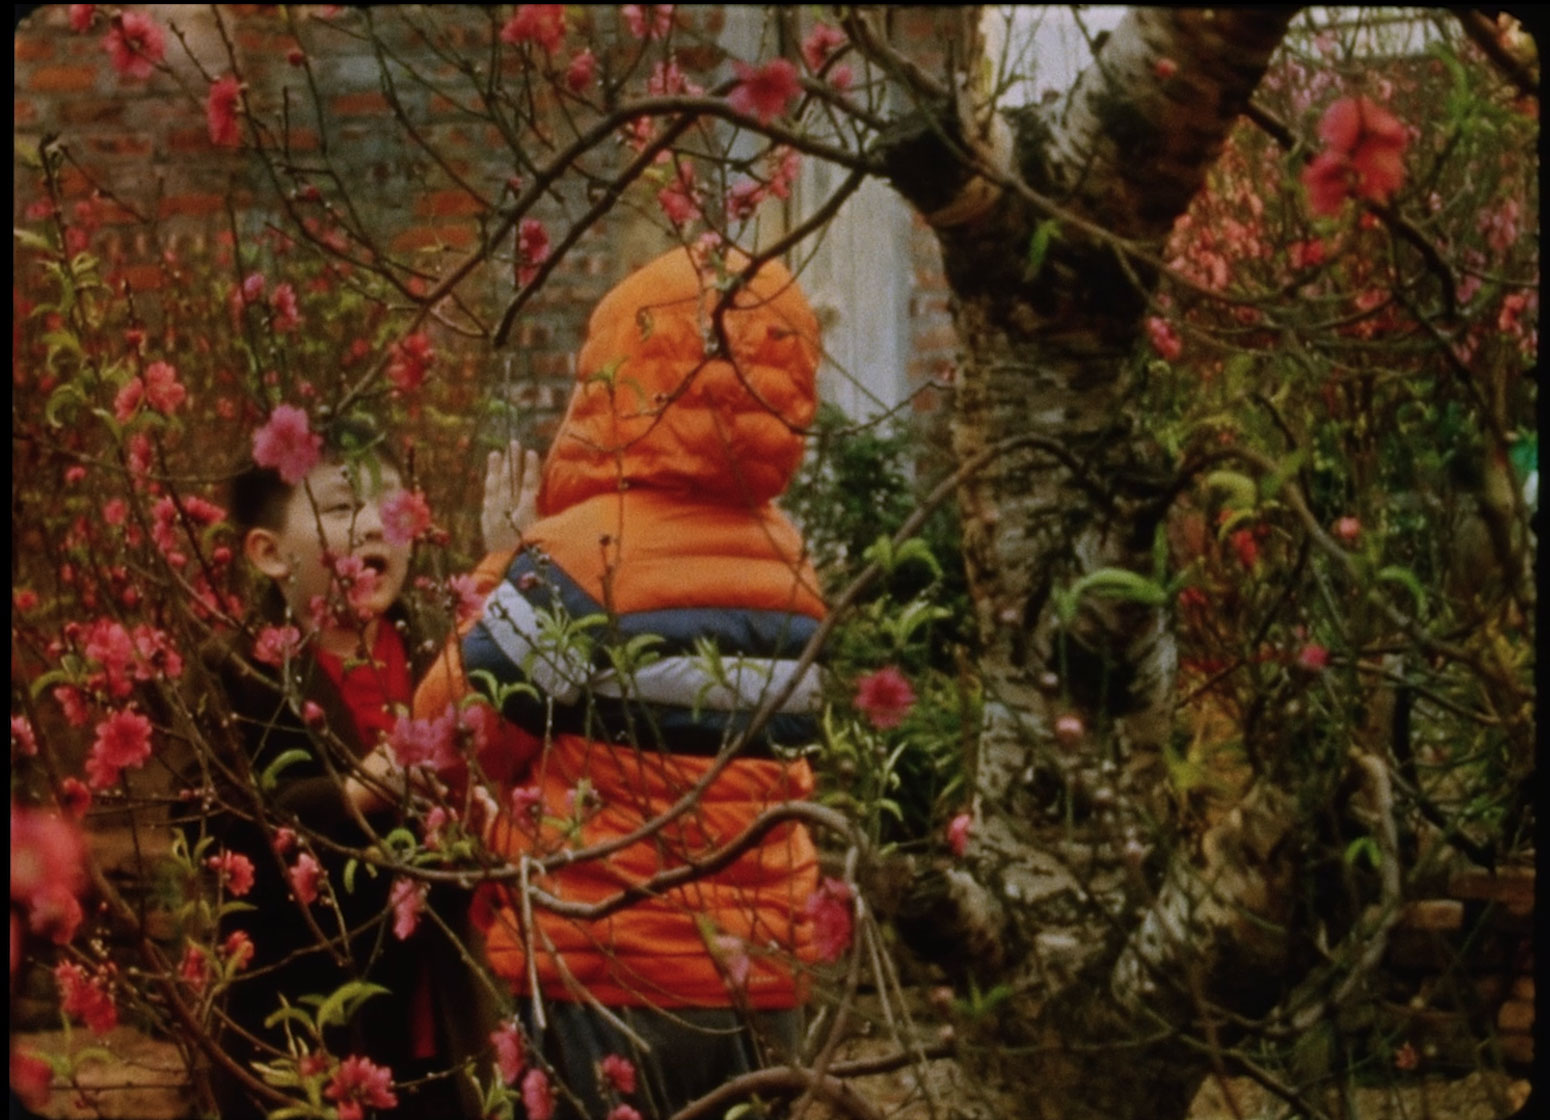 two small children, one facing the camera and wearing a red shirt and dark jacket and one facing away from the camera and wearing an orange hooded coat, stand in a grove of read-leafed trees